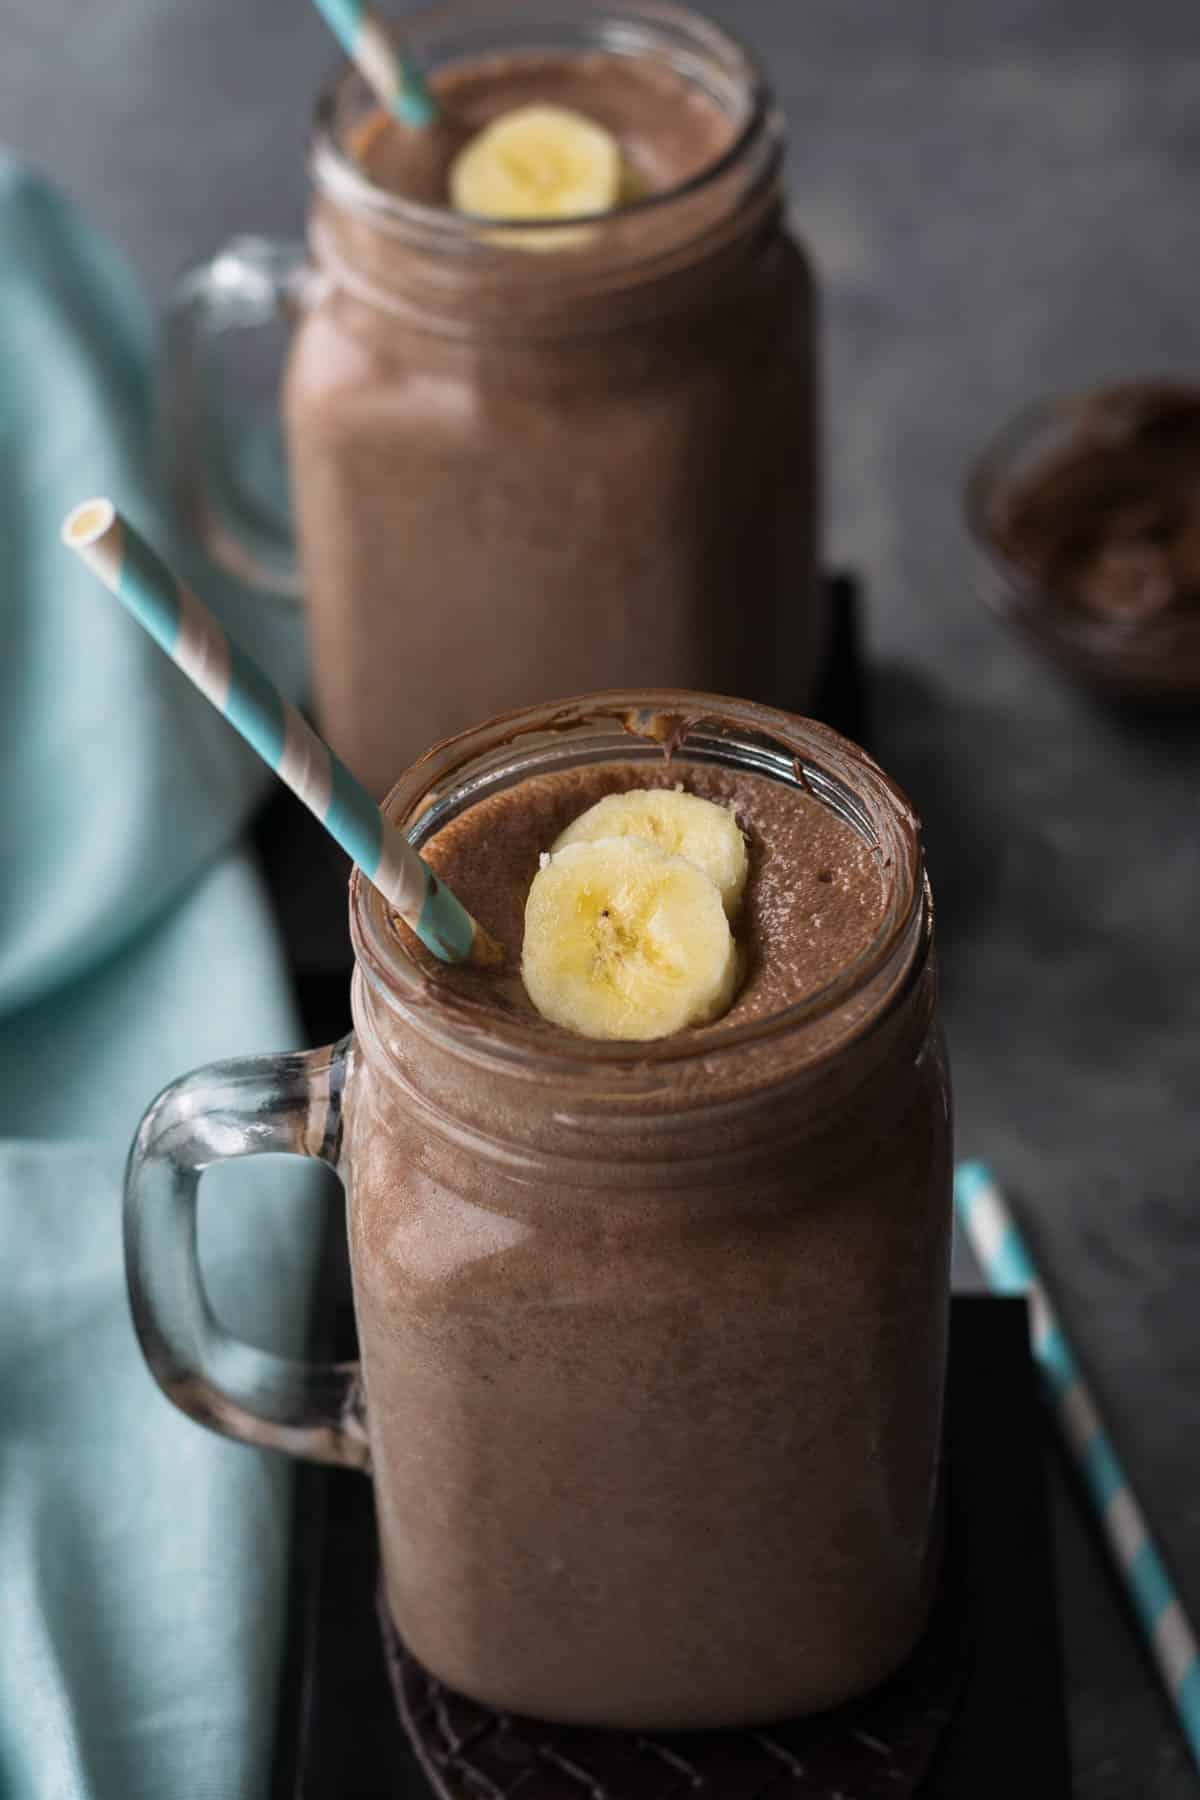 Your kids will love this delicious Banana Nutella Smoothie Recipe - a healthy-ish drink made from bananas and milk with a hint of Nutella and cocoa powder.